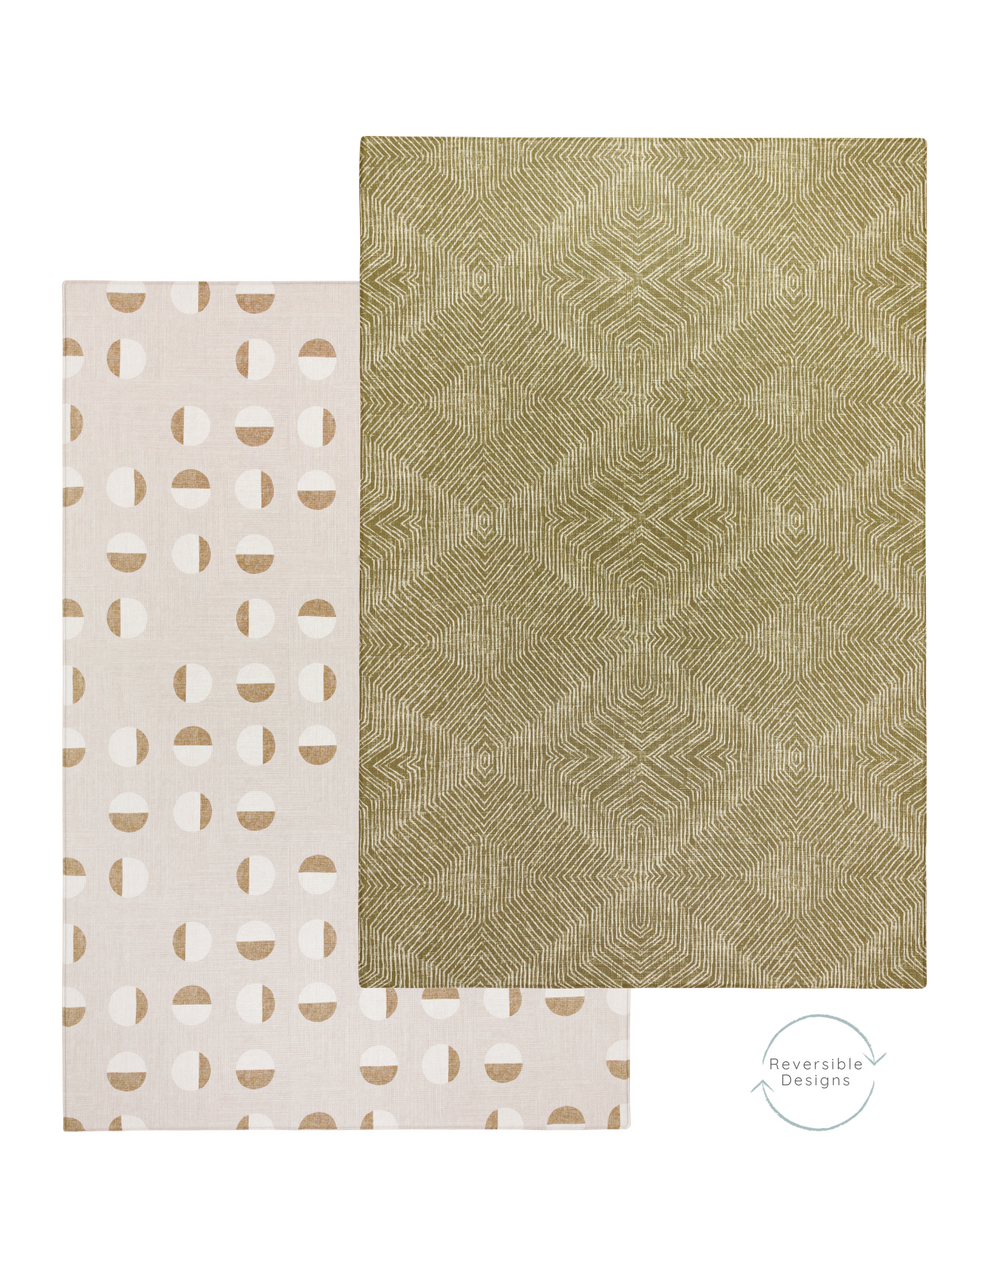 A muted design play mat that complements various decor styles